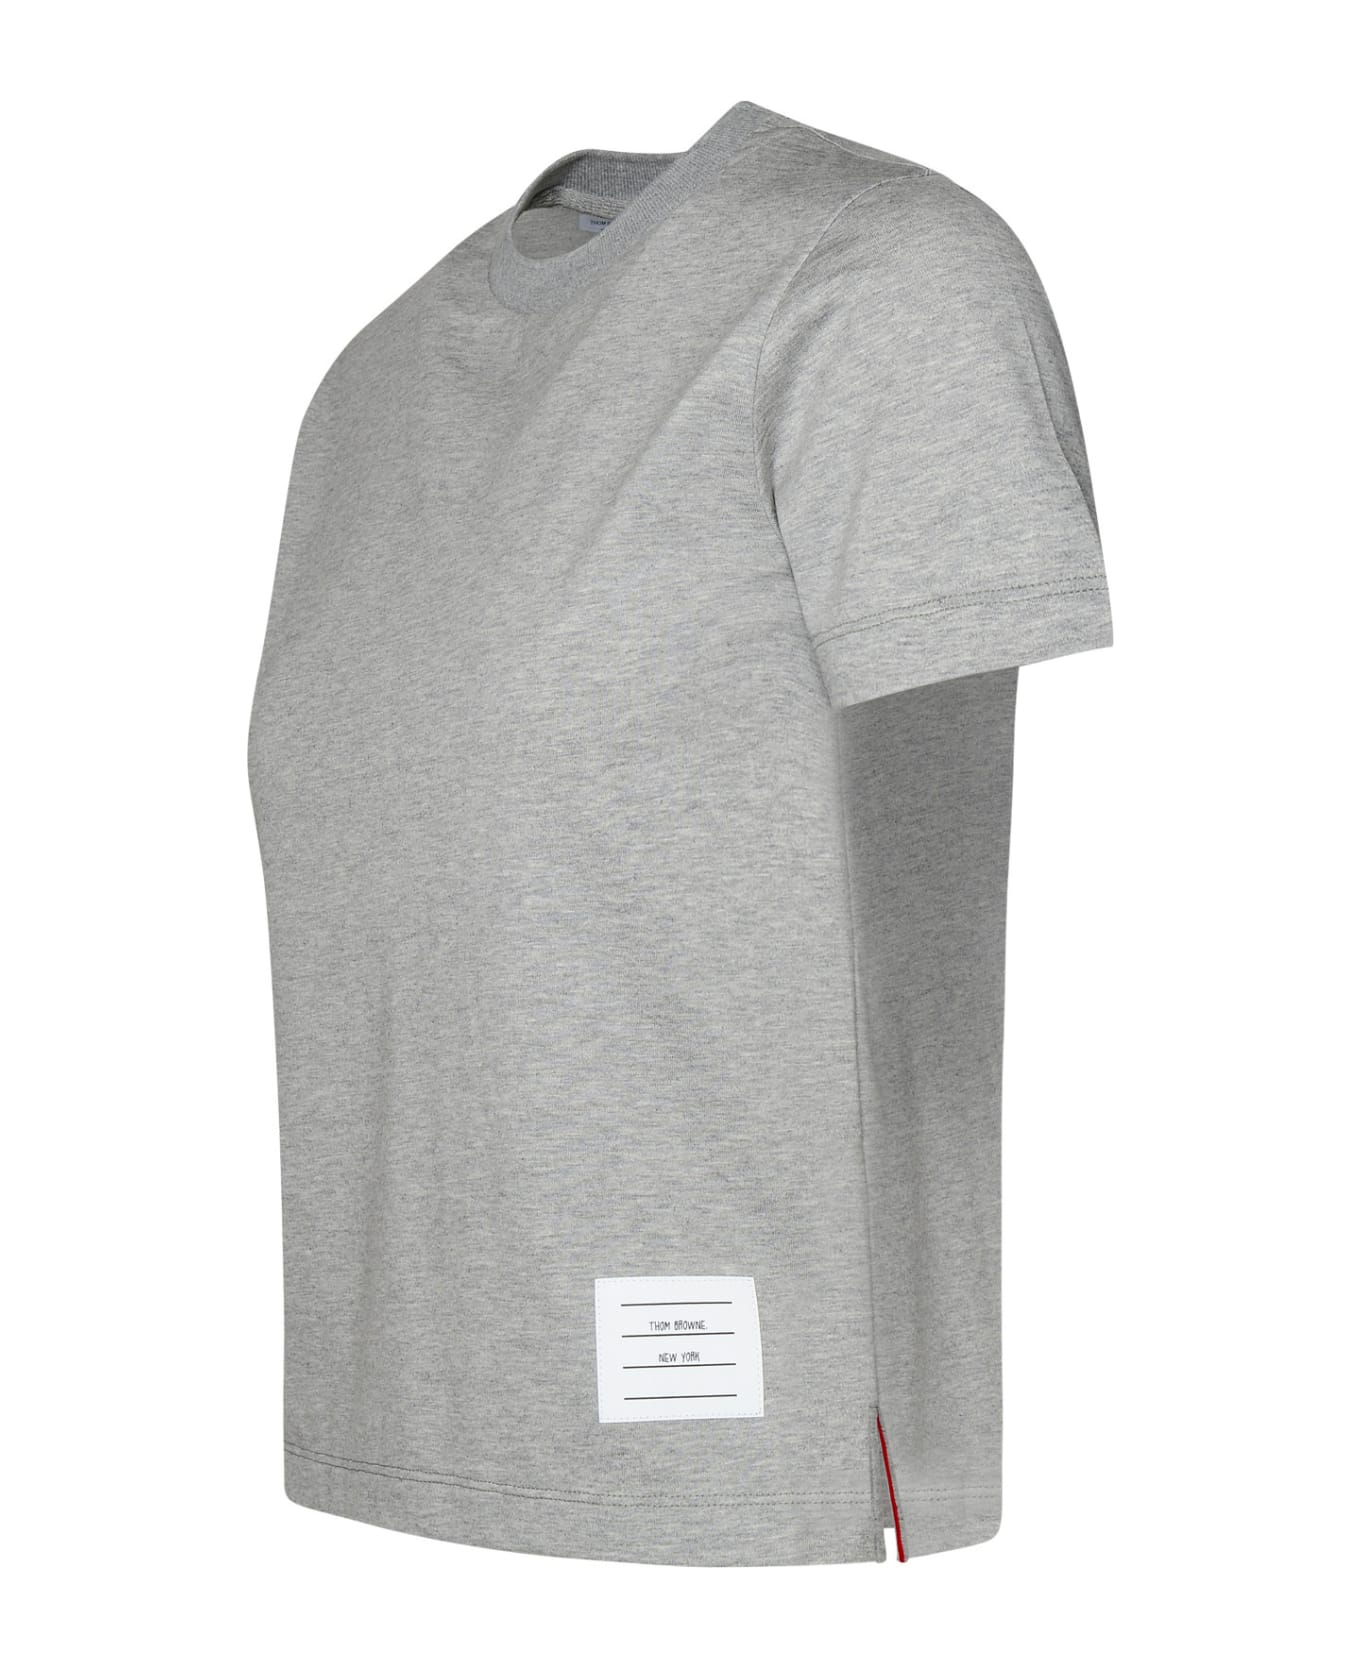 Thom Browne 'relaxed' Grey Cotton T-shirt - LIGHT GREY Tシャツ